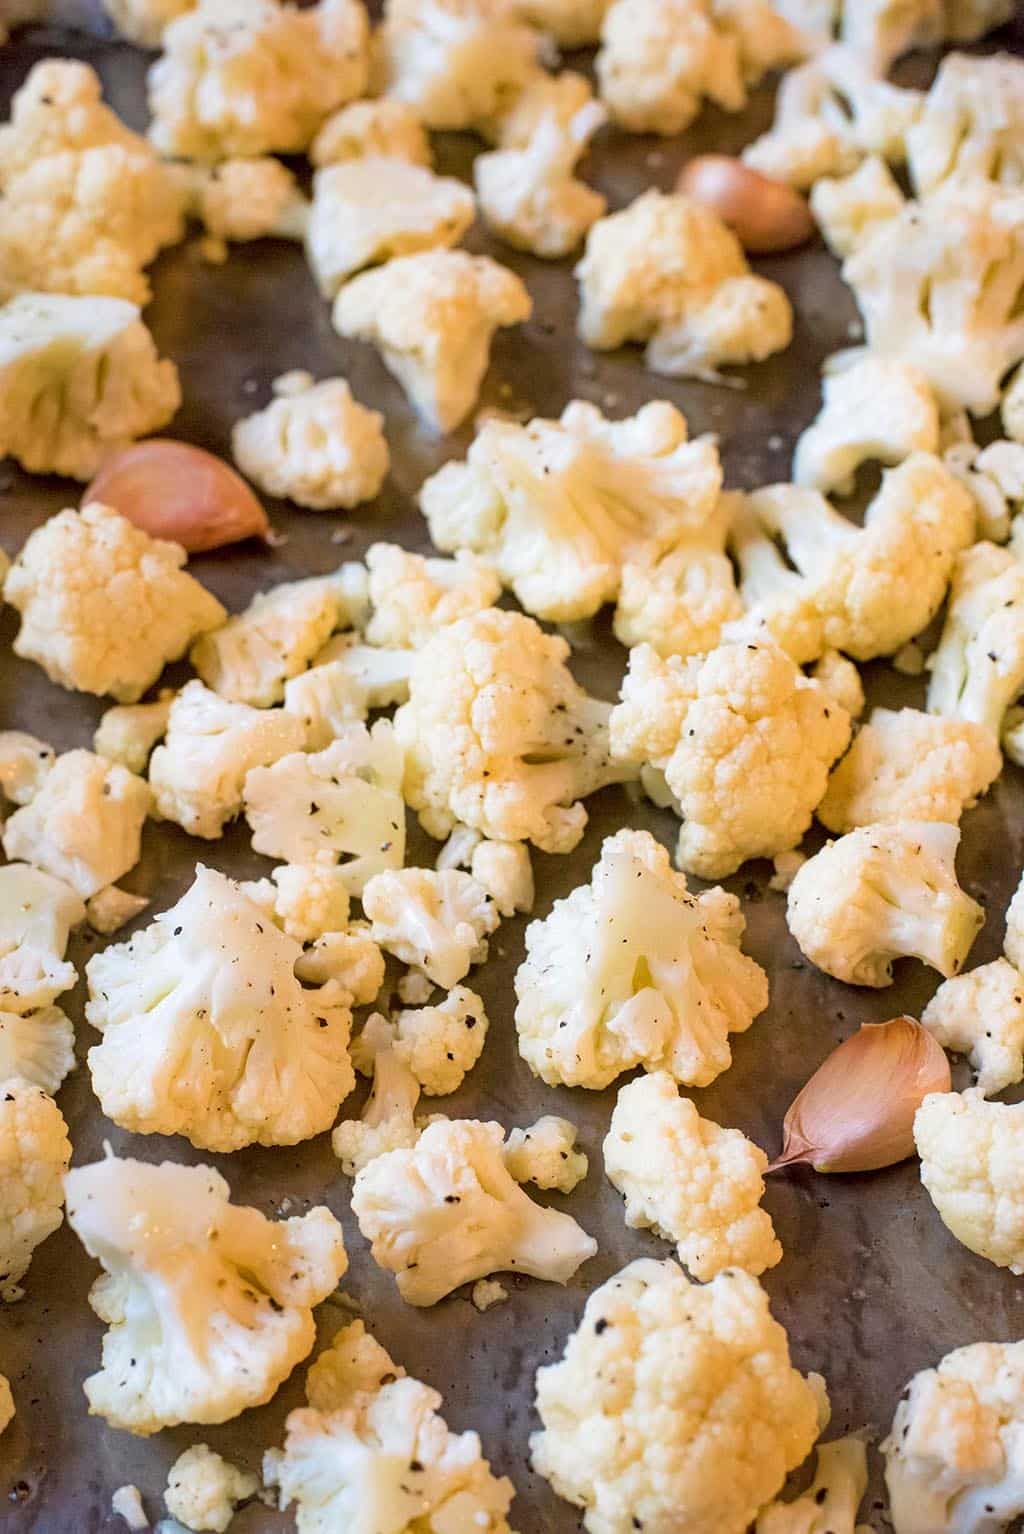 A tray of cauliflower florets and garlic cloves, seasoned with pepper.